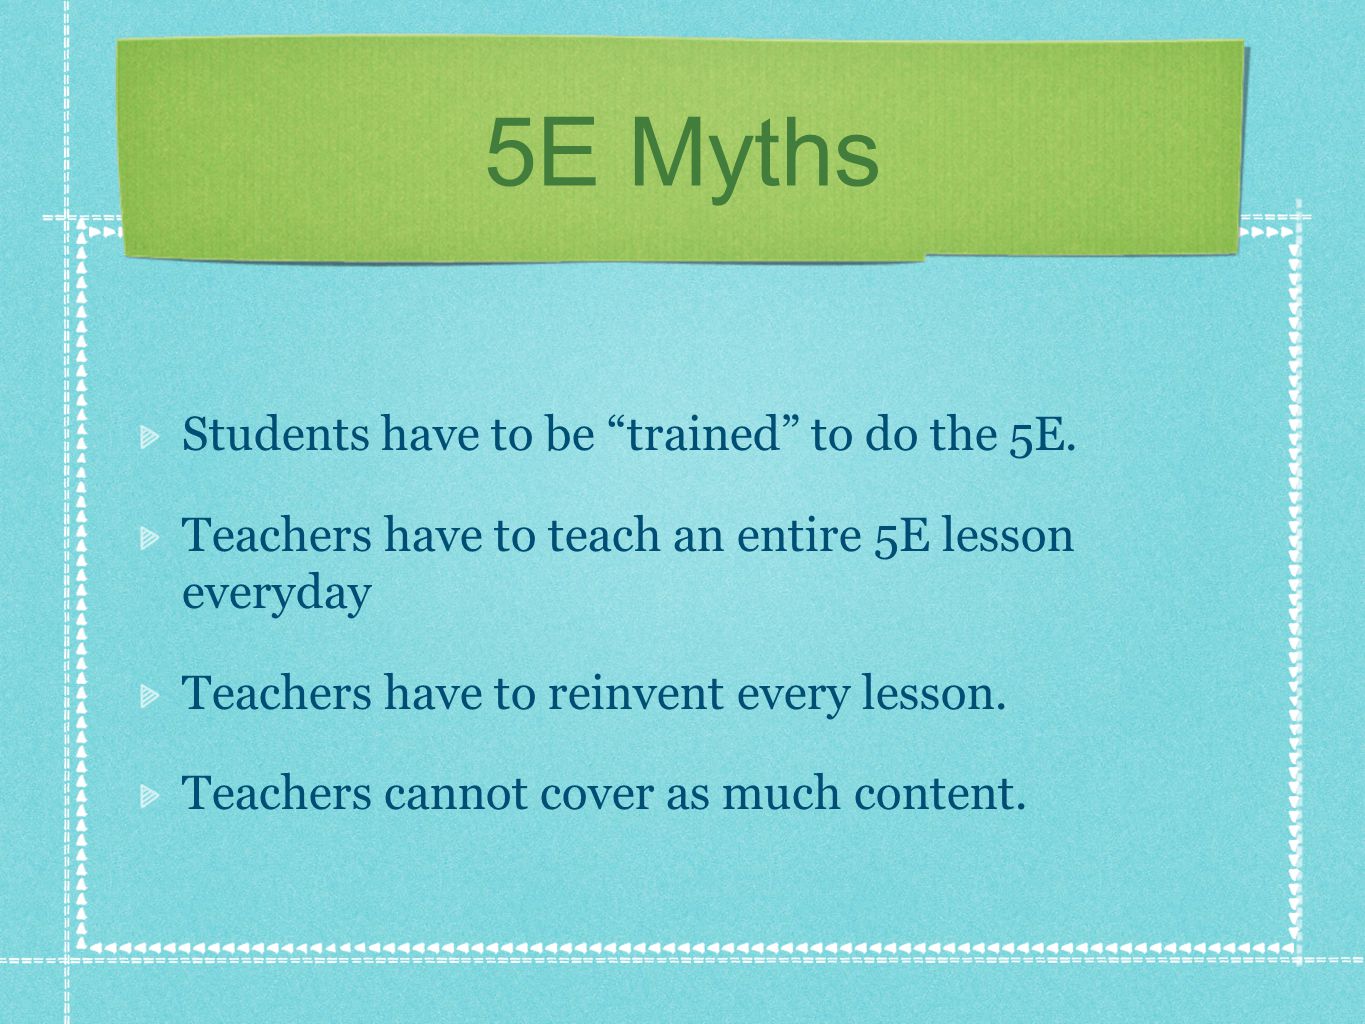 5E Myths Students have to be trained to do the 5E.